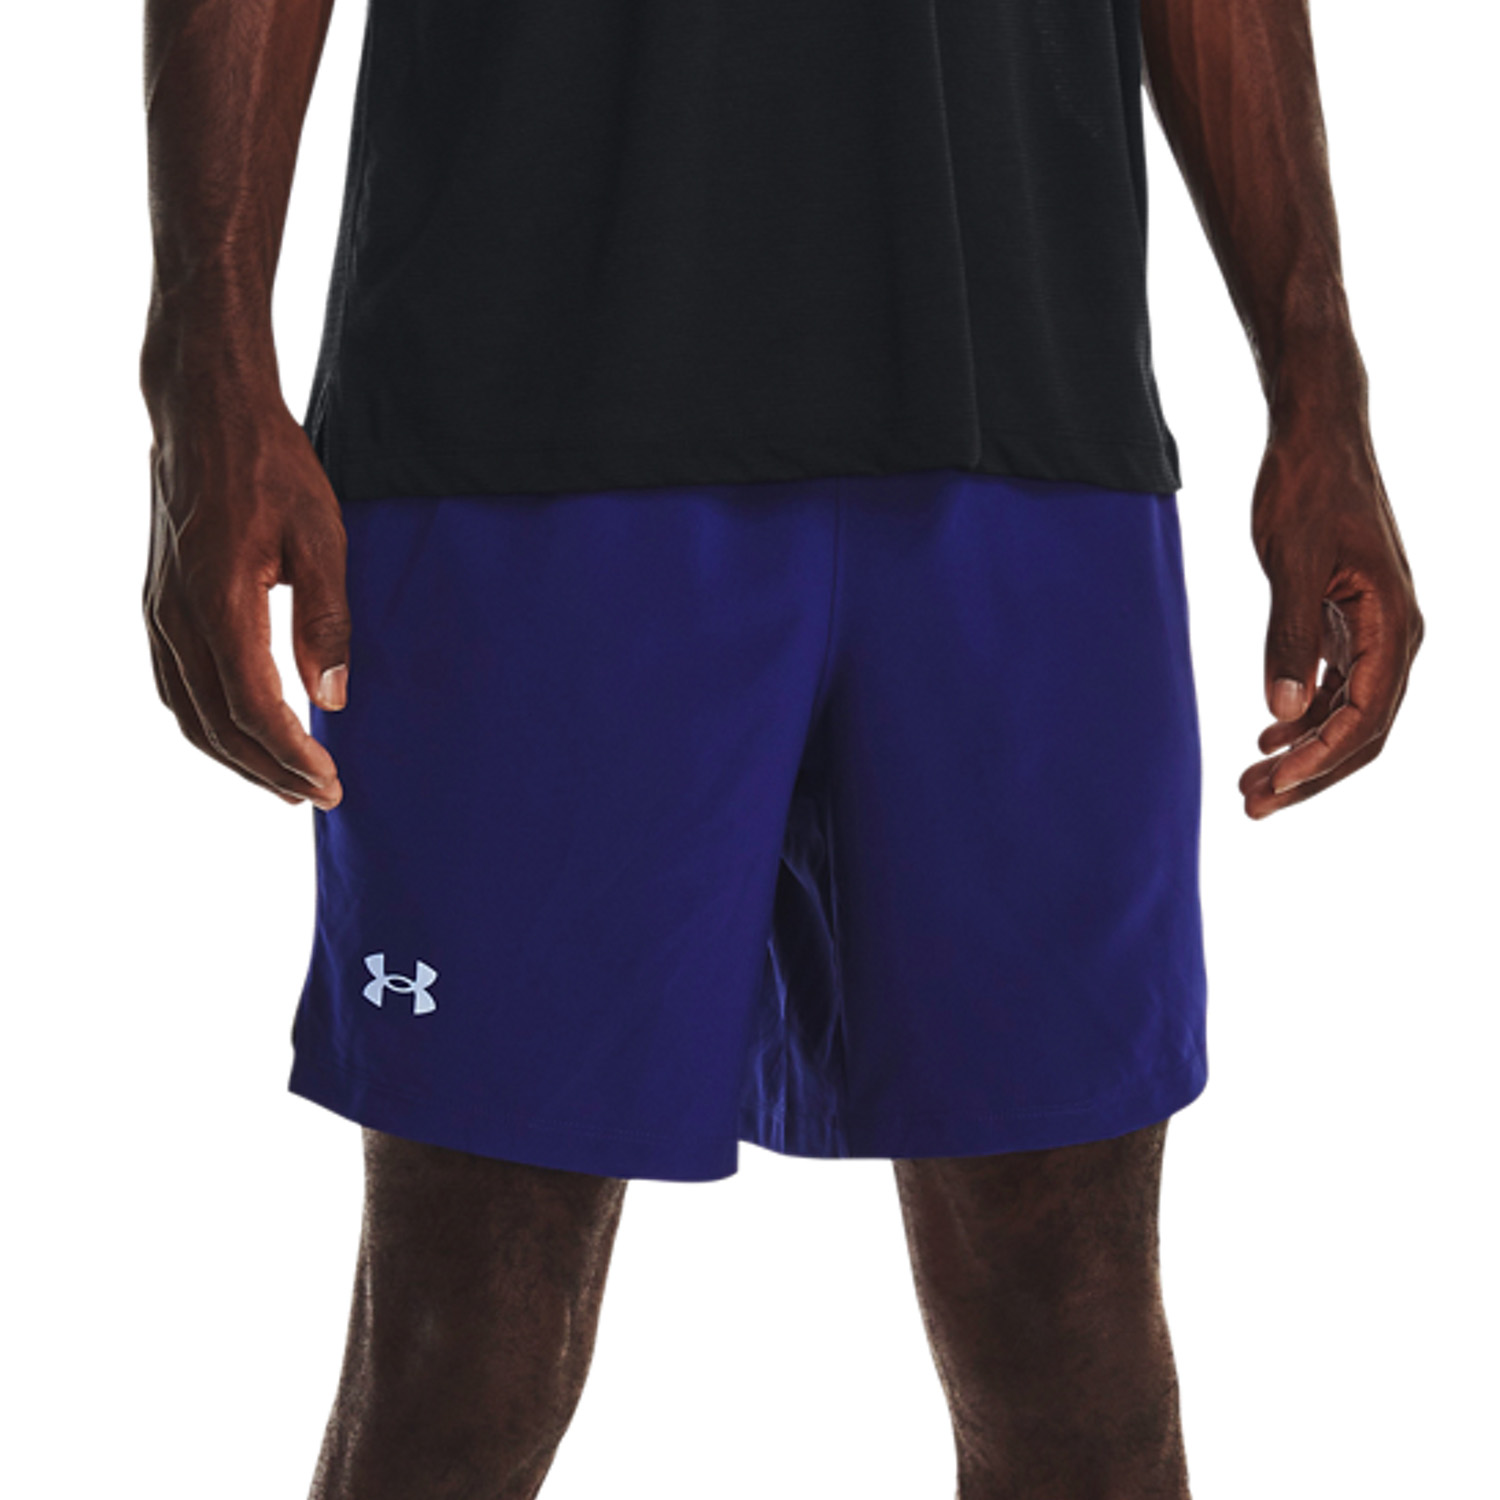 Under Armour Launch 2 in 1 7in Pantaloncini - Sonar Blue/Black/Reflective